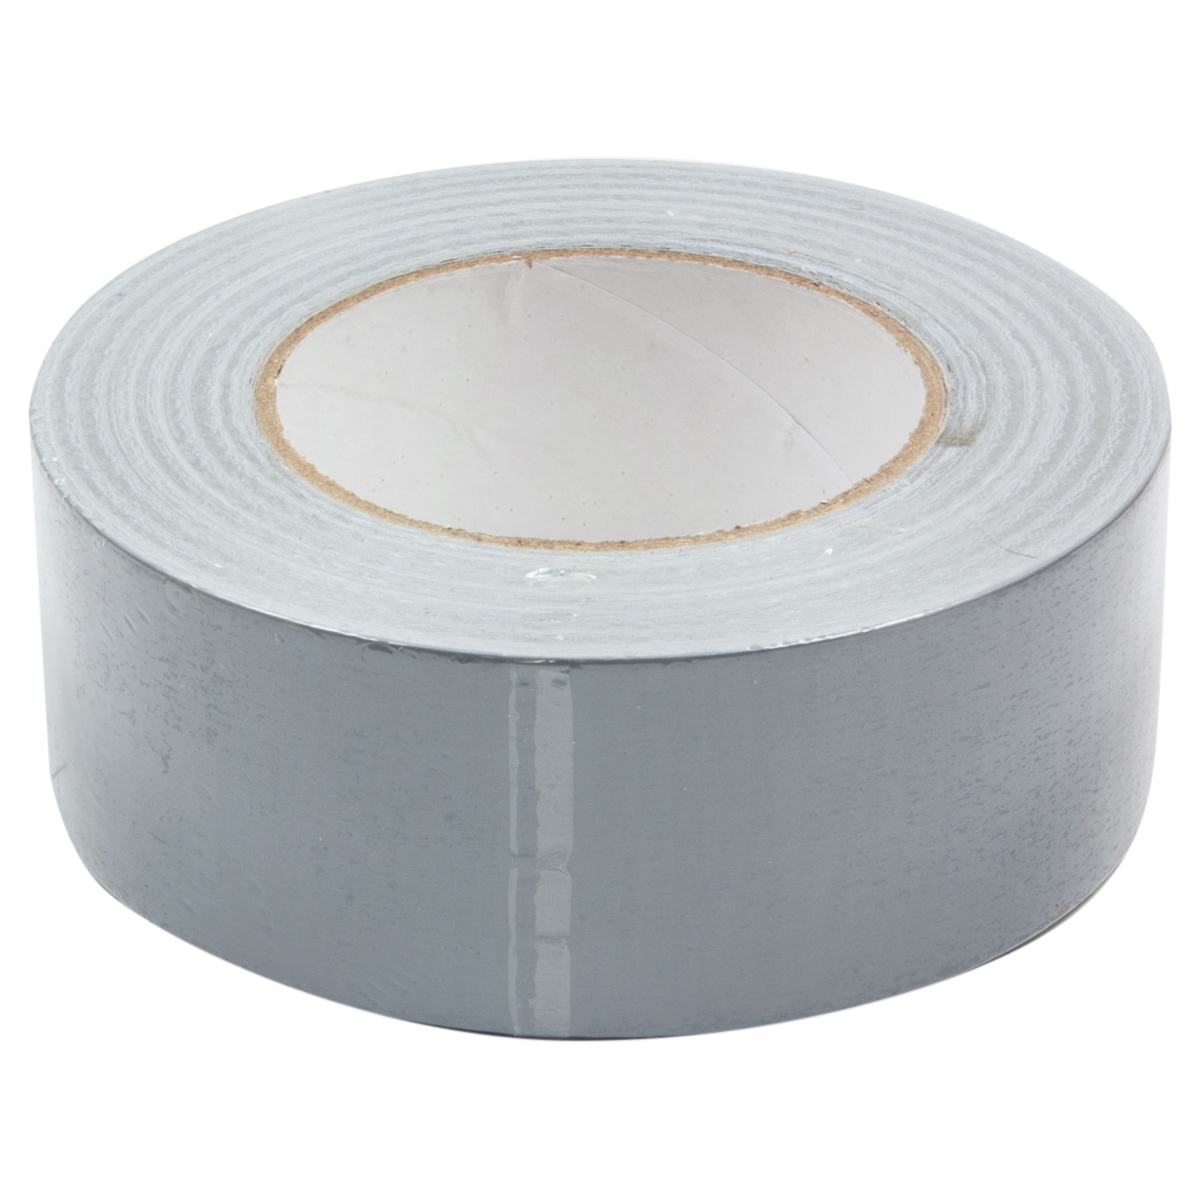 K Tool 73560 Duct Tape, 2 x 60 Yards, All Purpose, Gray, Sold